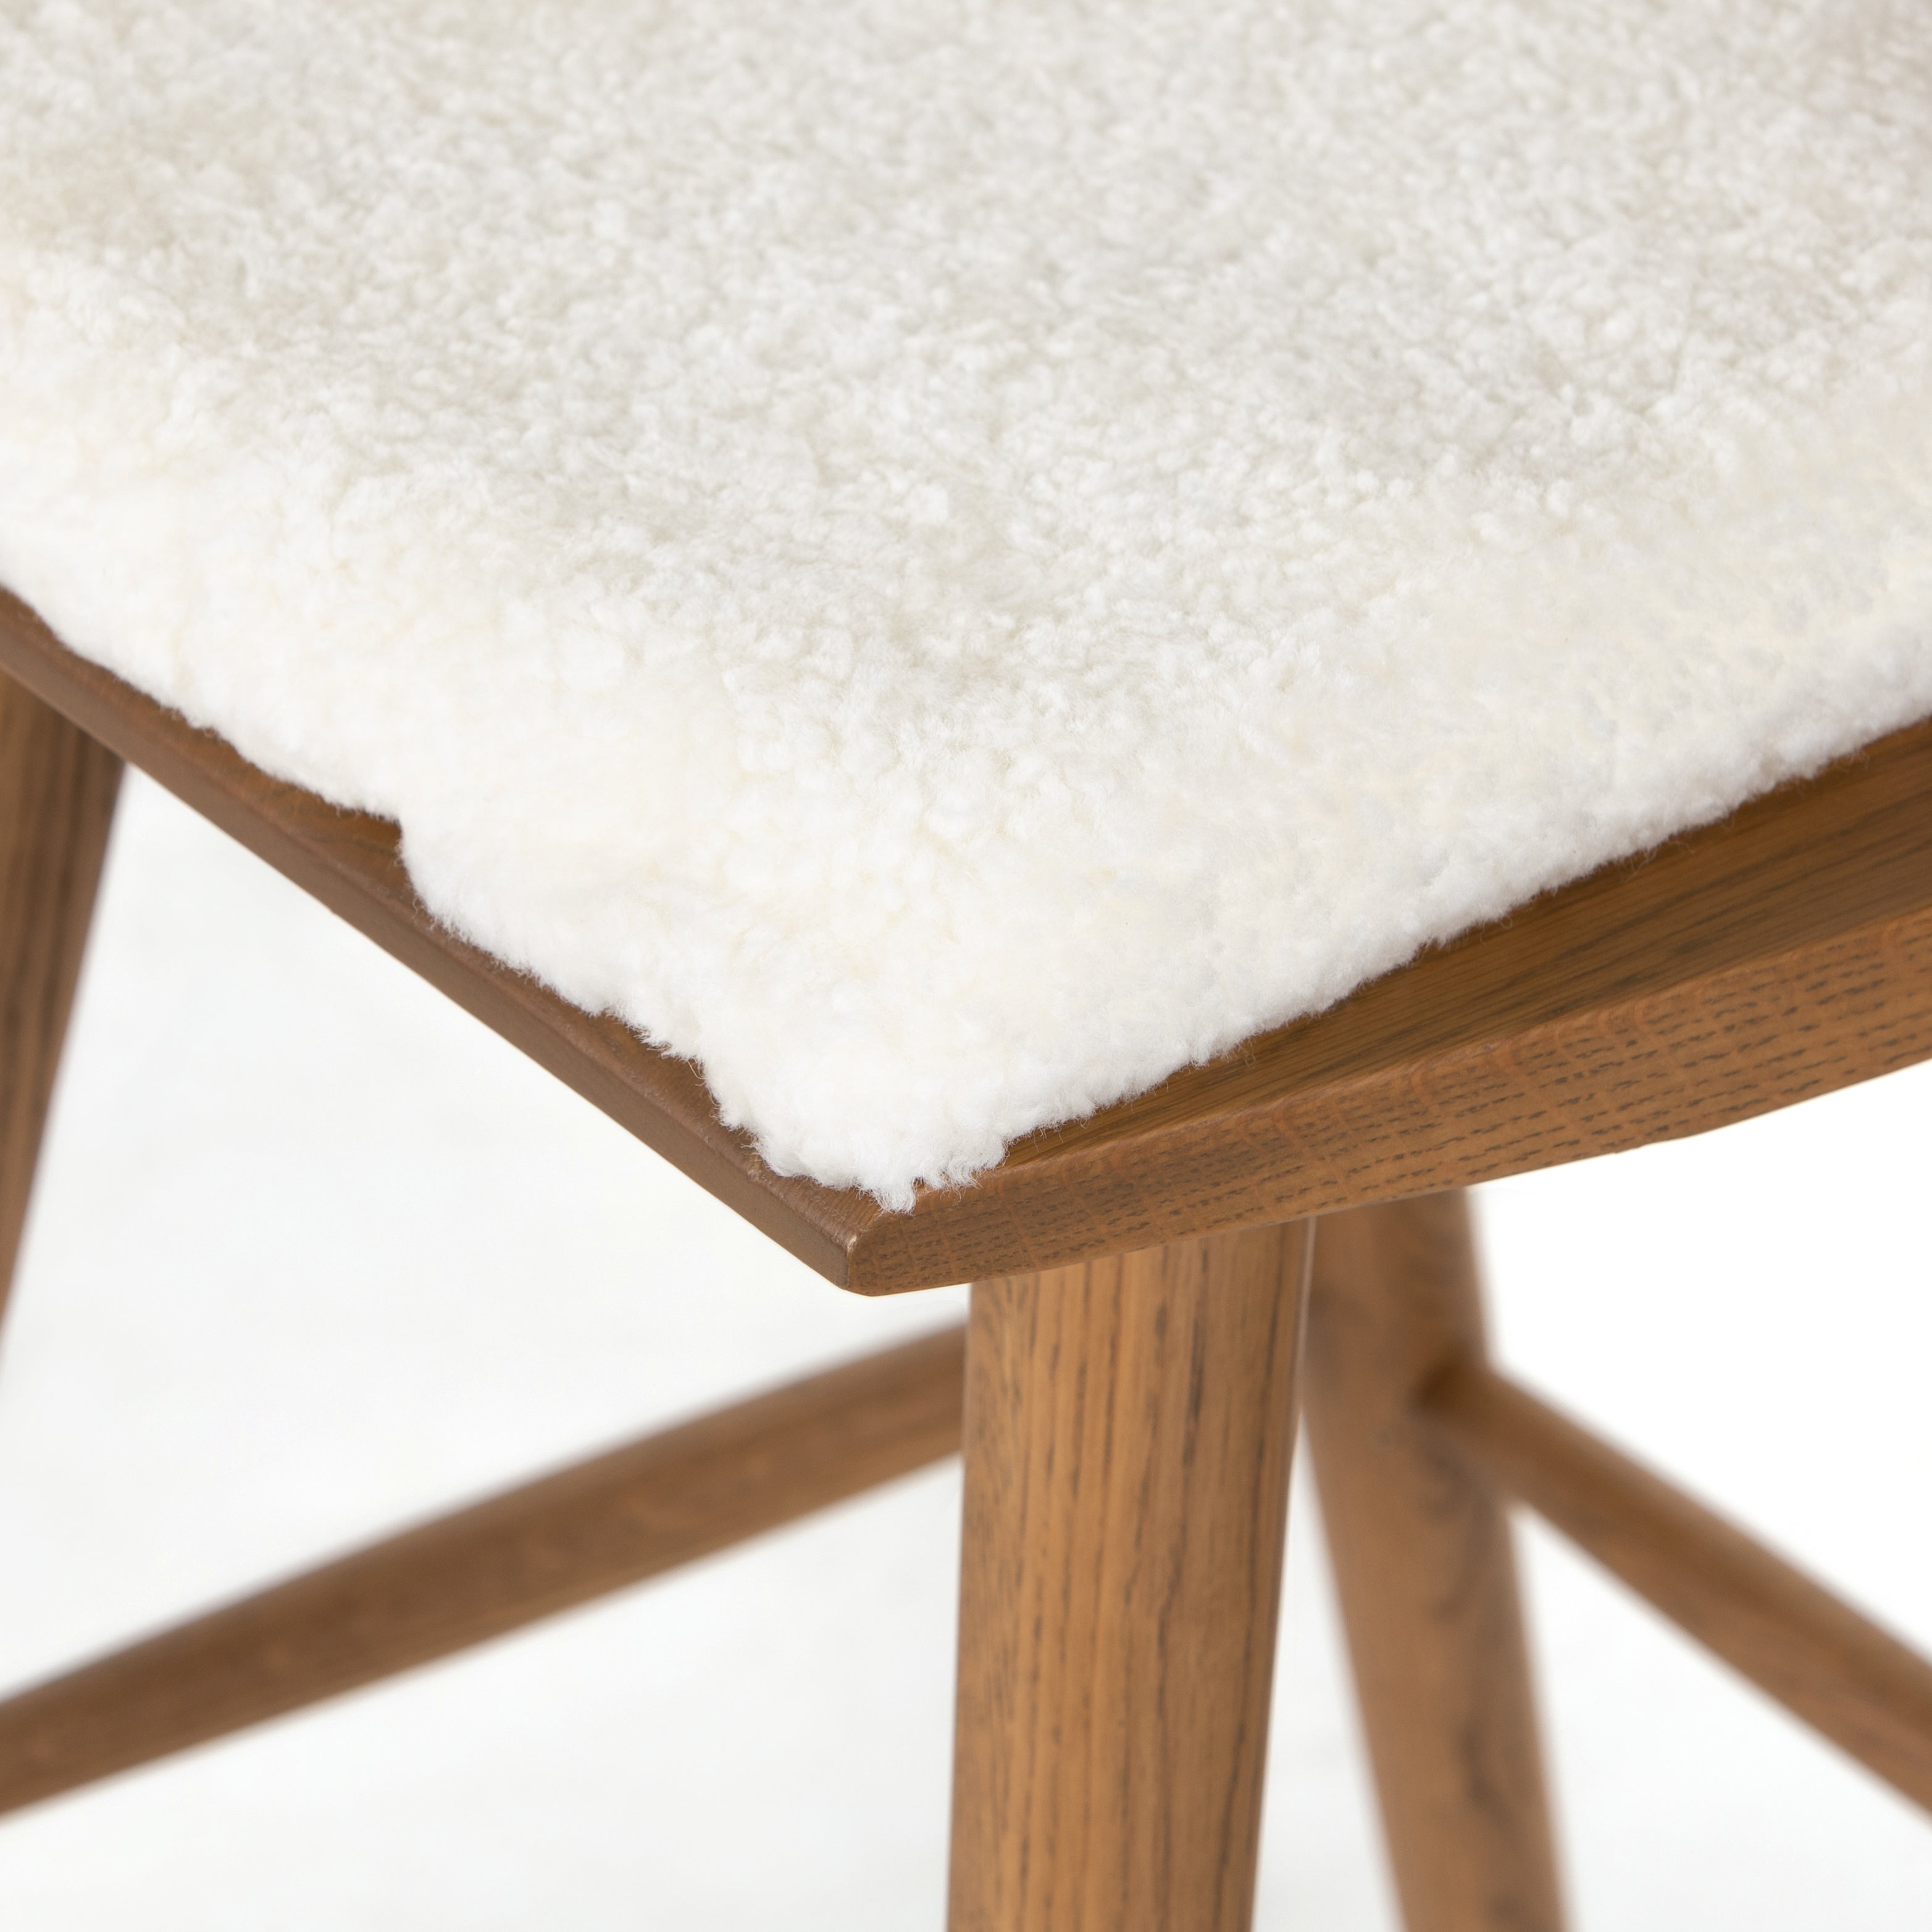 Sandy Oak and Cream Shorn Sheepskin with Ivory Backing Fabric (Bar Height) | Lewis Windsor Bar/Counter Stool | Valley Ridge Furniture